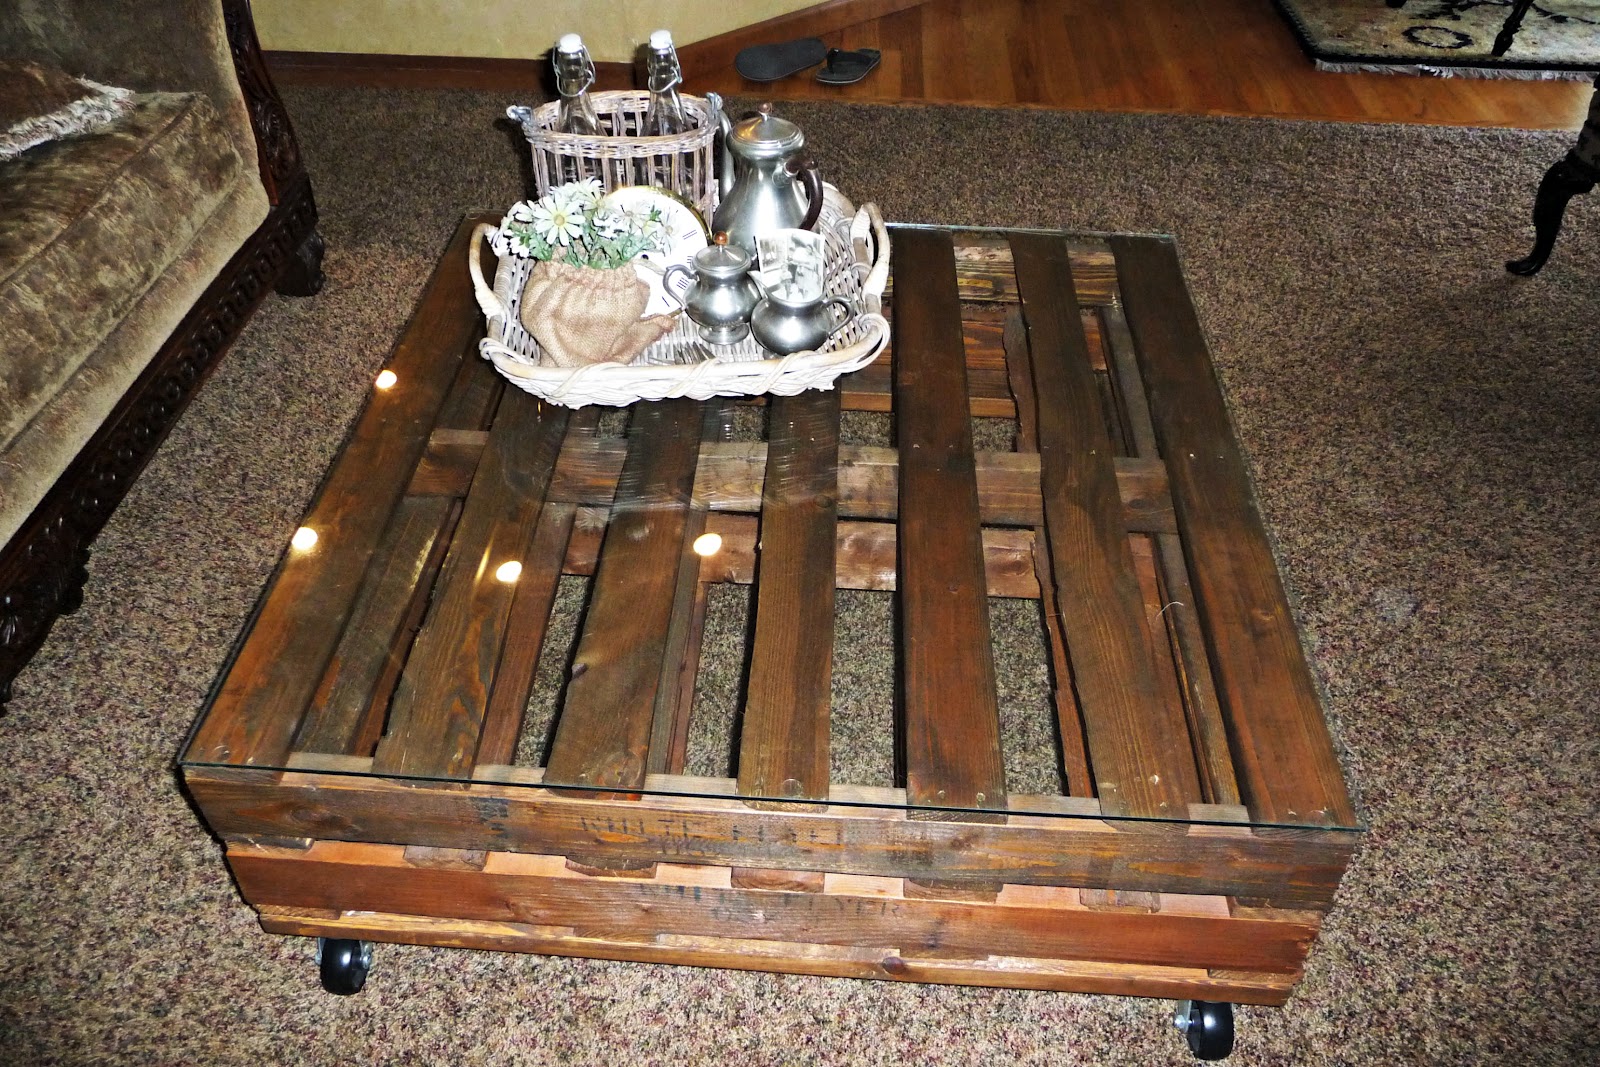 Creative Juices for Decor: DIY Pallet Coffee Table Adds Character ...